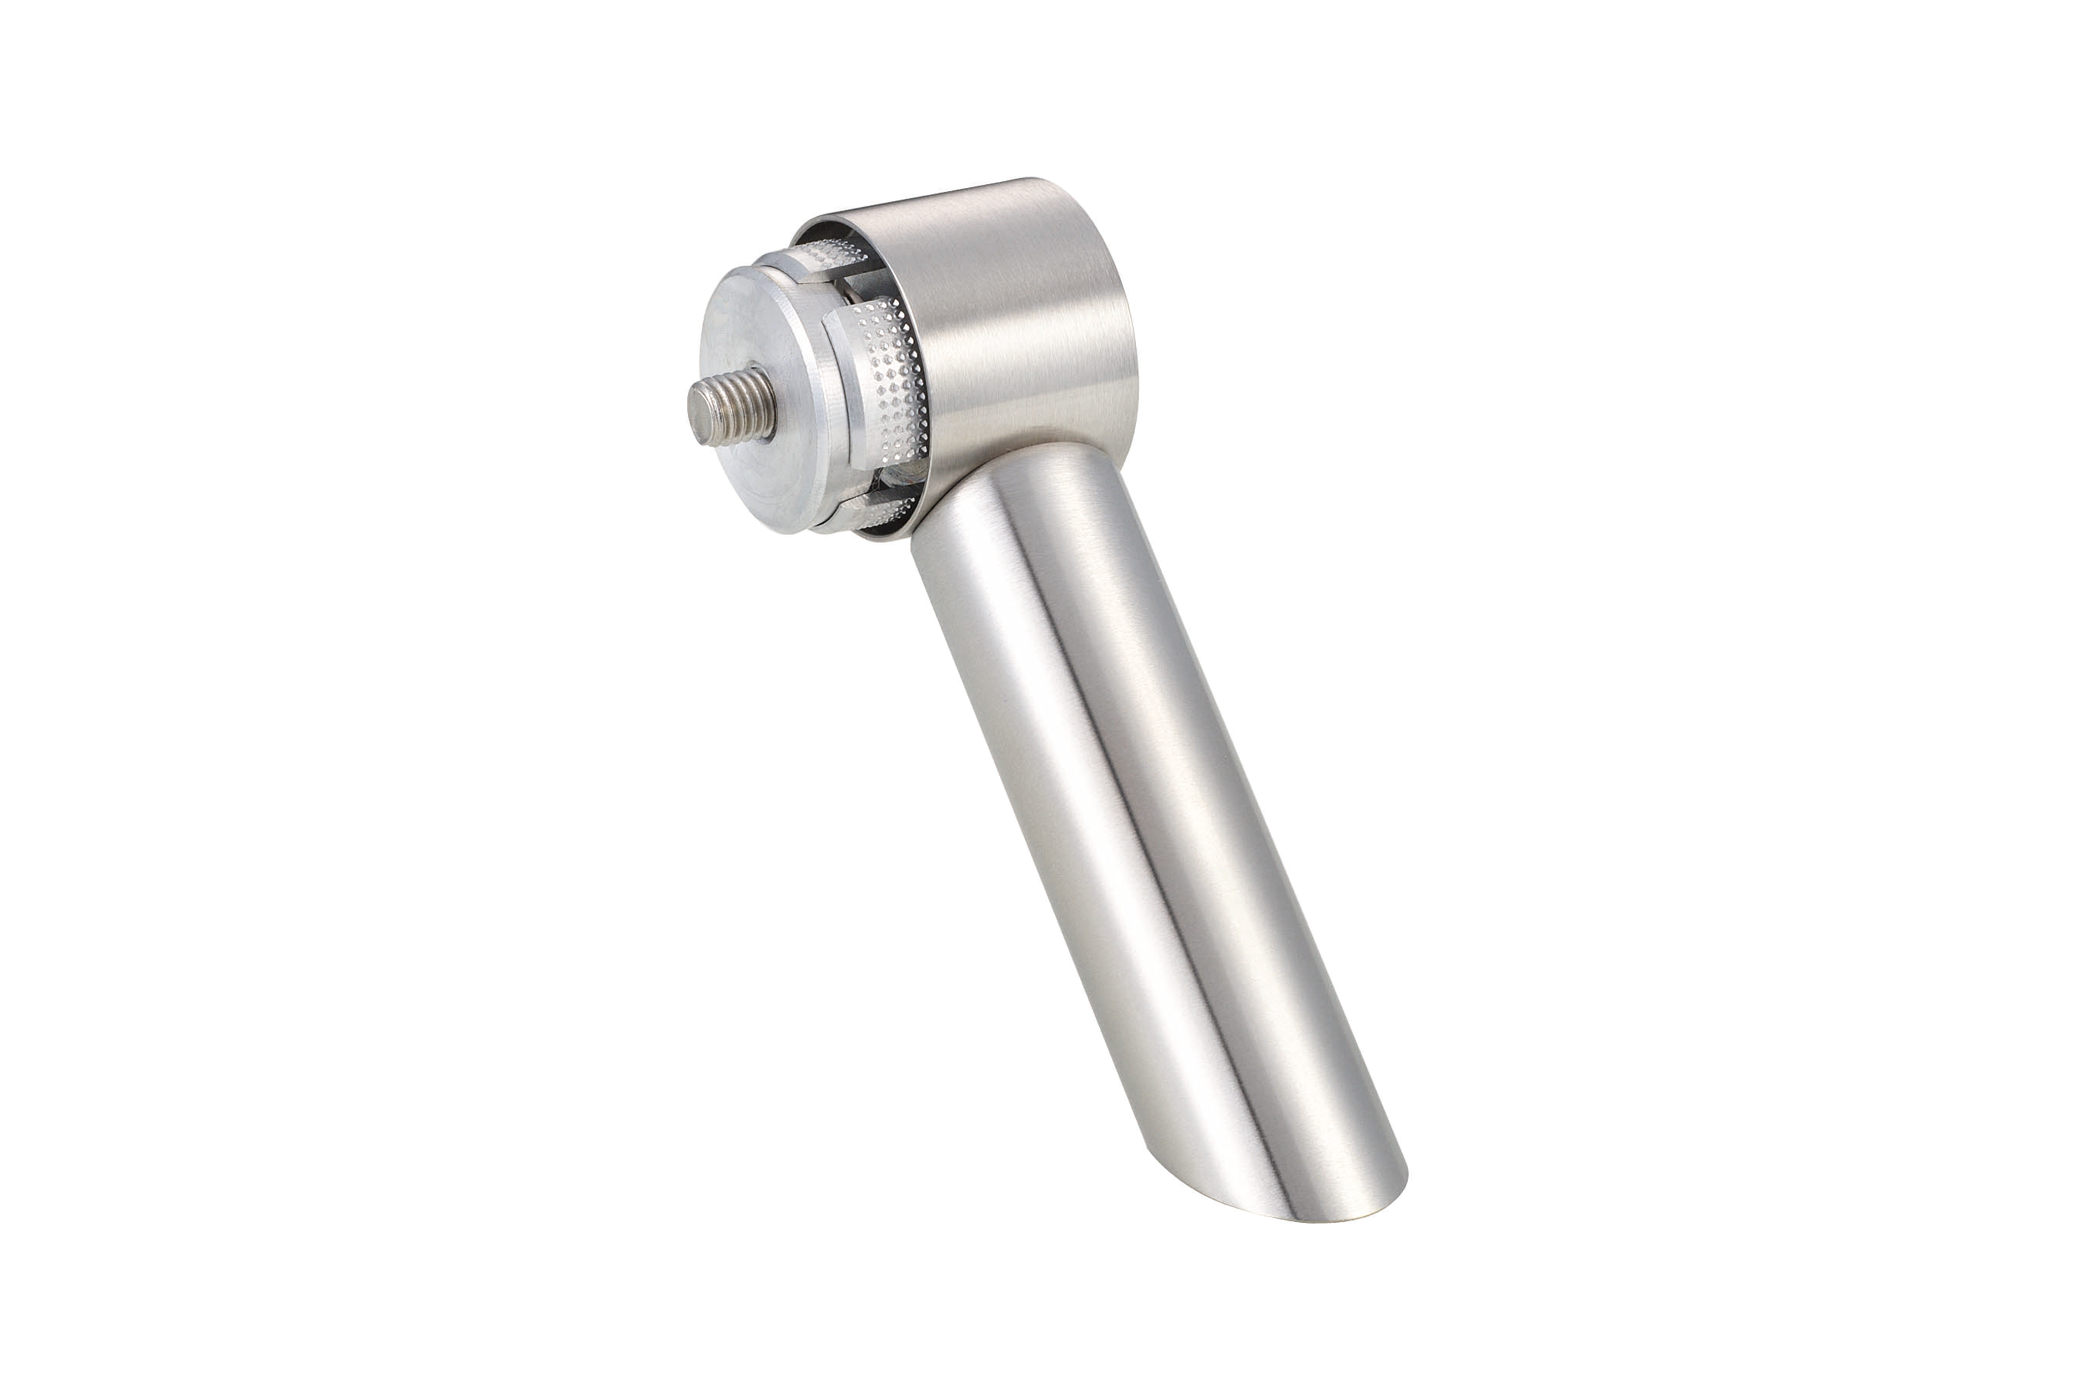 KWS End support 8362 in finish 82 (stainless steel, matte), direction left